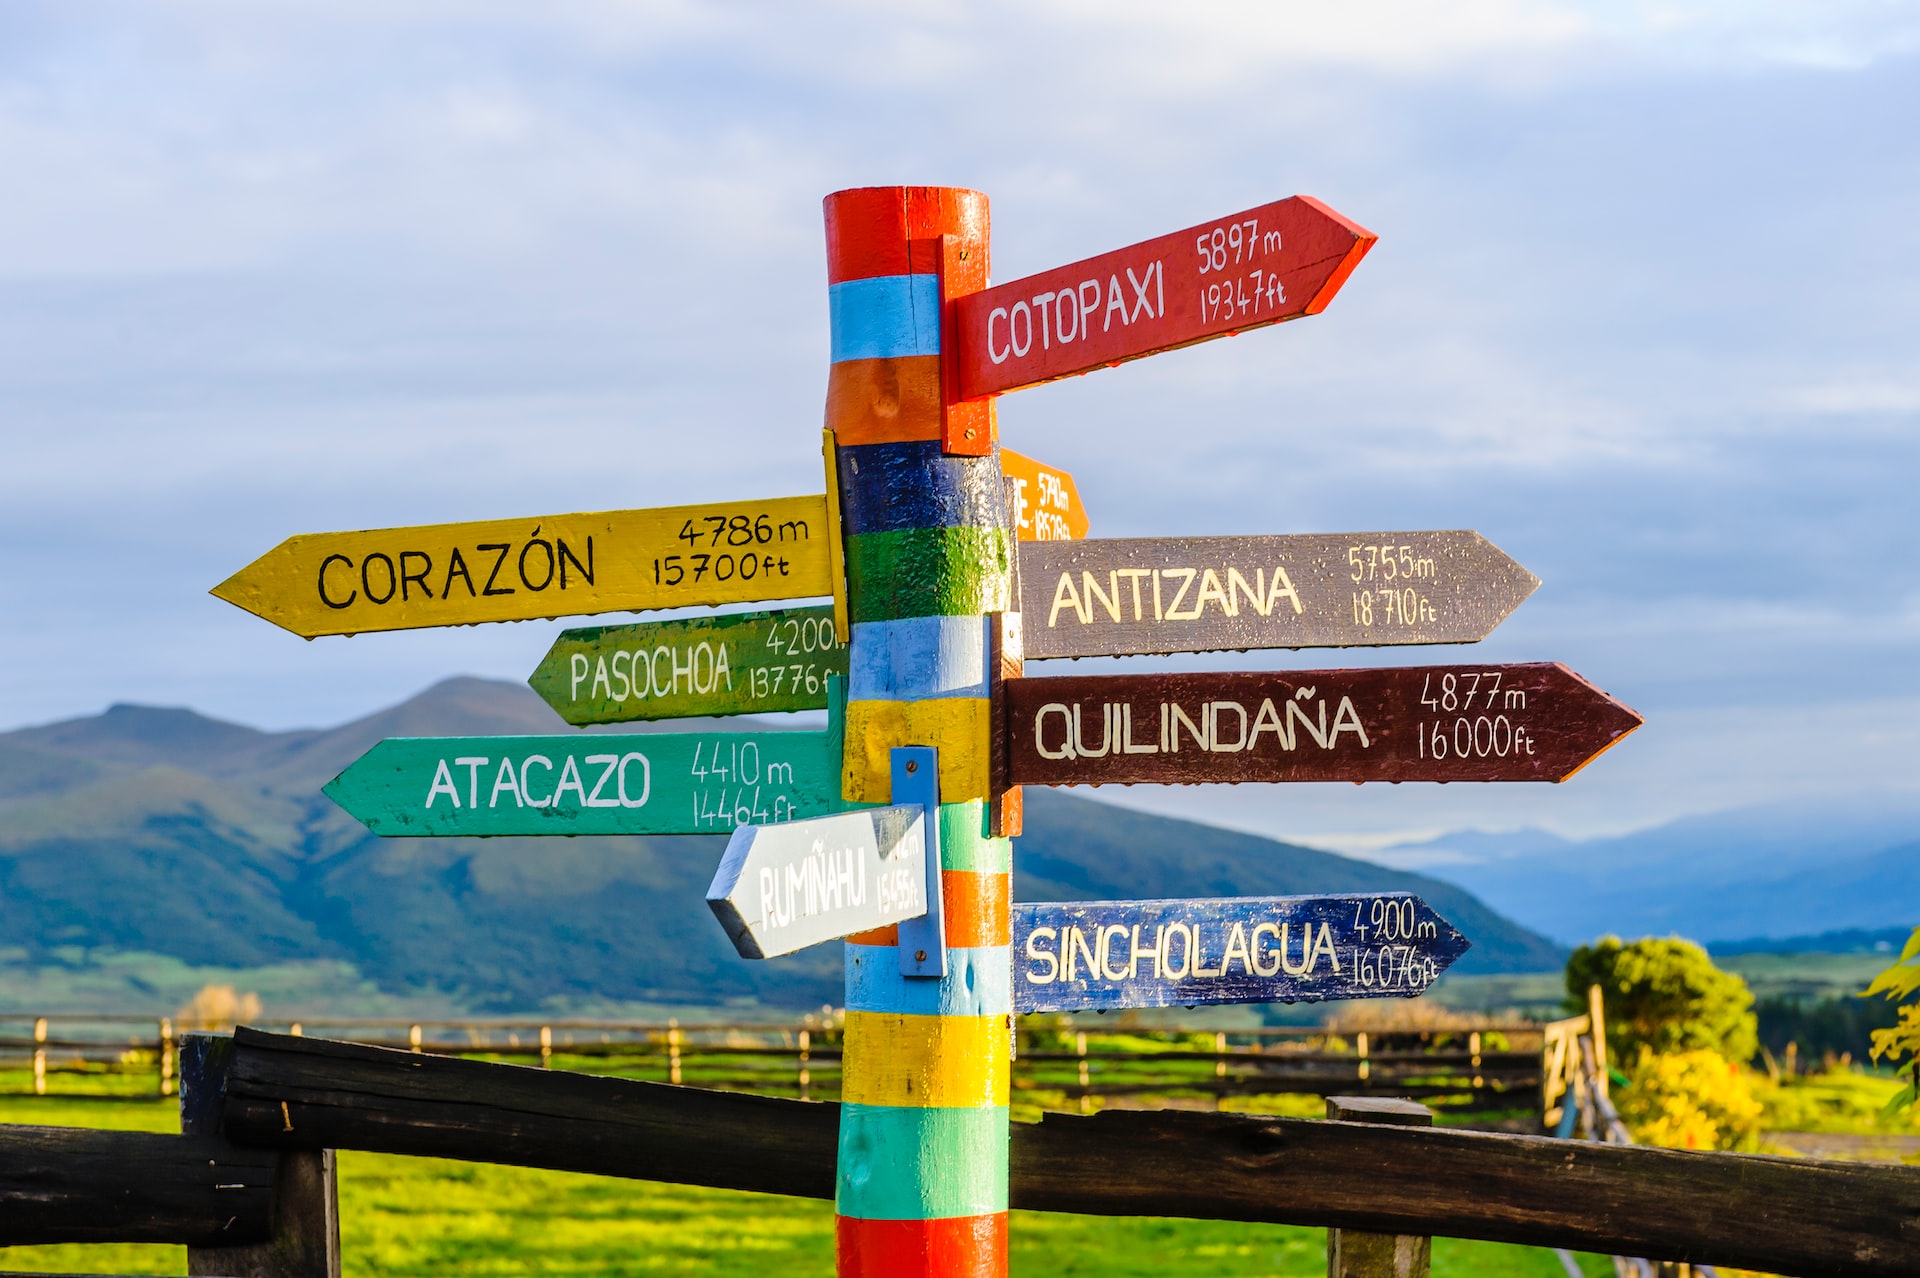 Colorful way sign in South America.